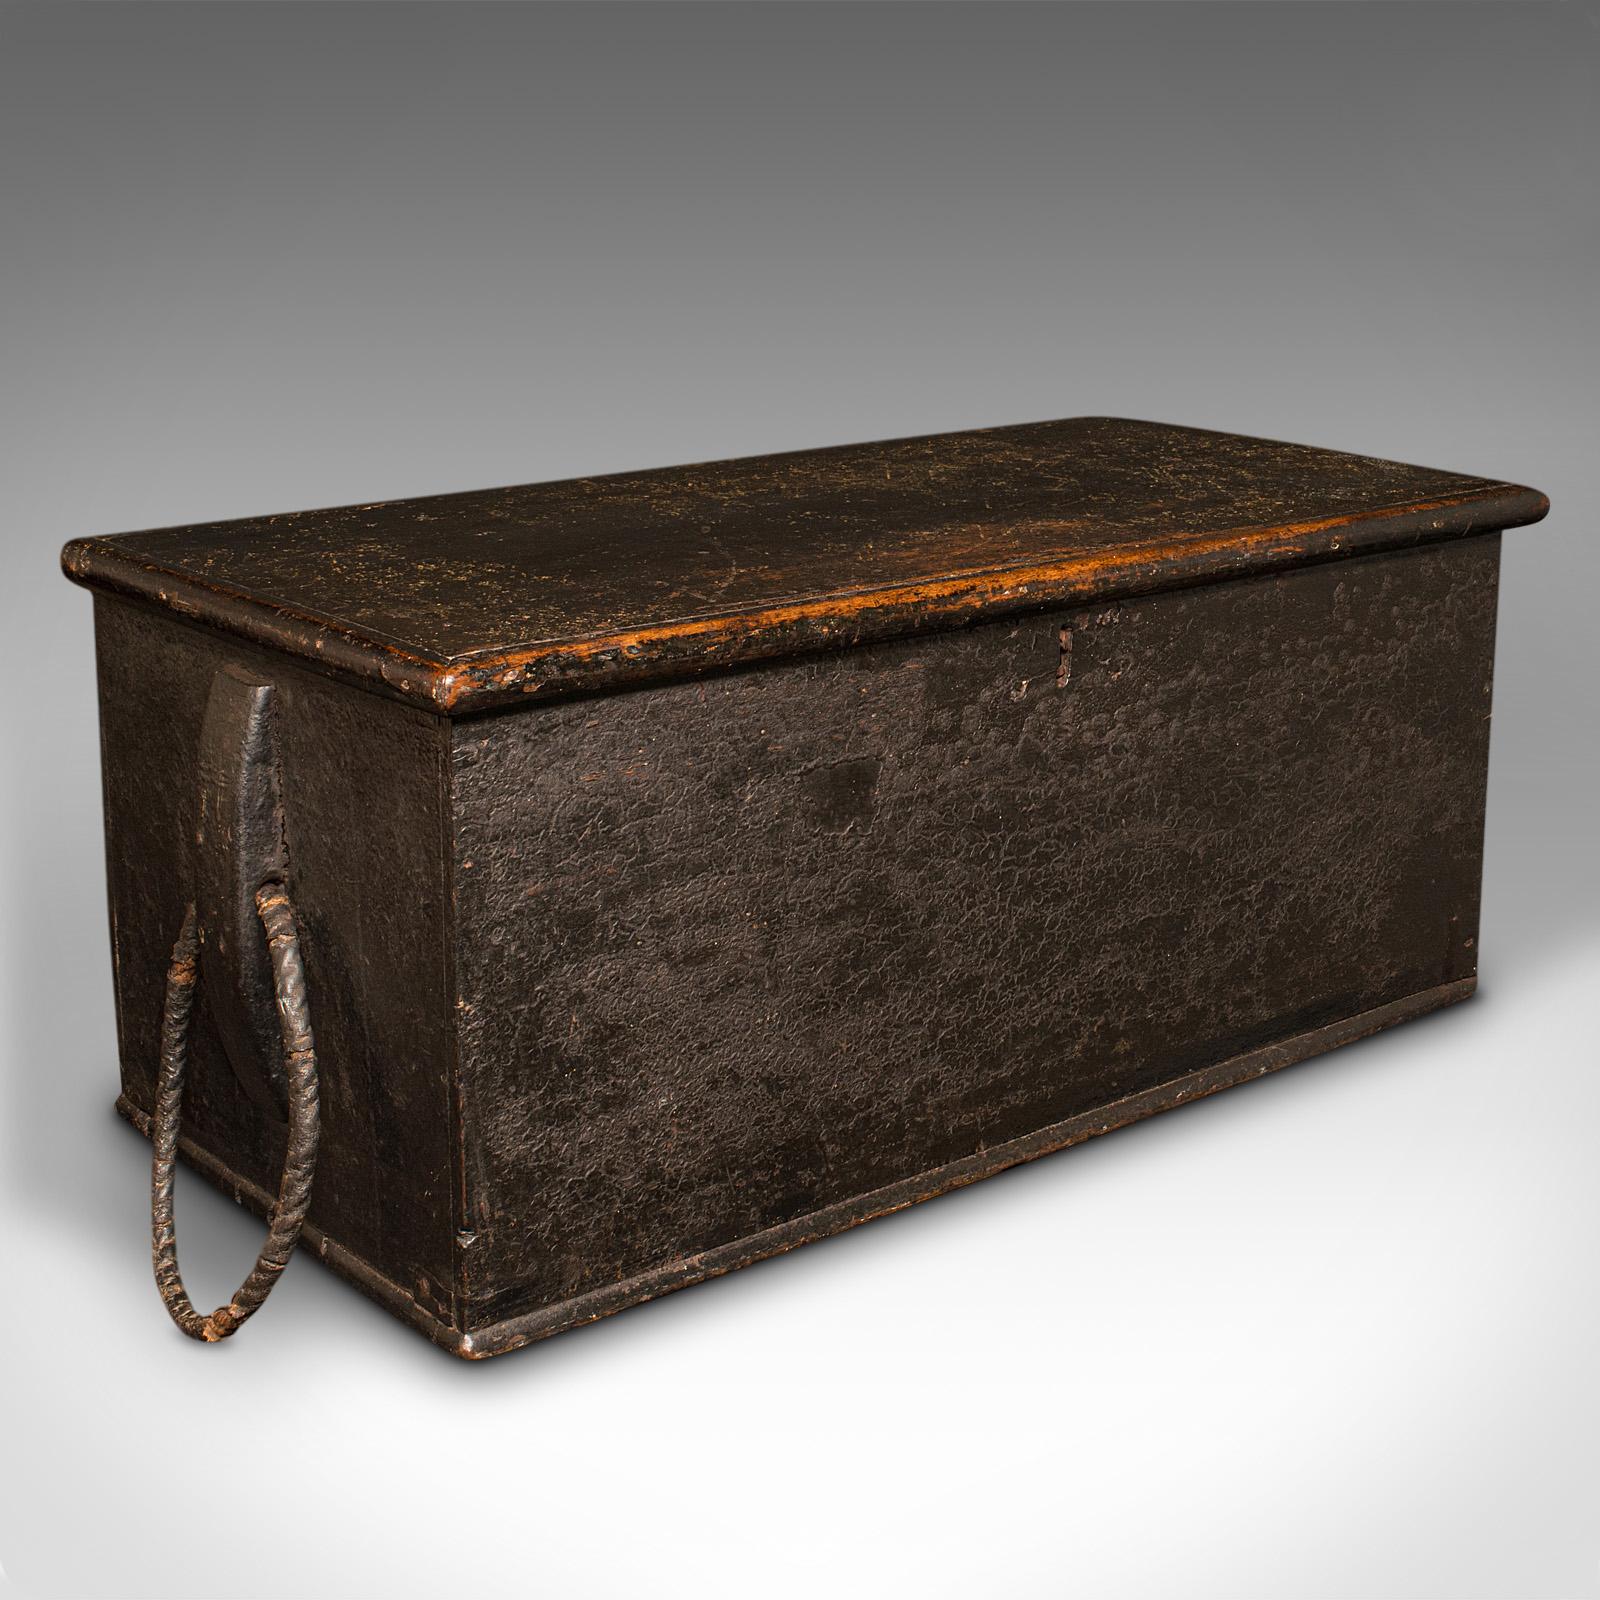 This is a large antique ship's chest. An English, ebonised pine shipping or workman's trunk, dating to the early Victorian period, circa 1850.

Of impressive proportion, a delightfully weathered shipping chest
Displays a desirable aged patina and